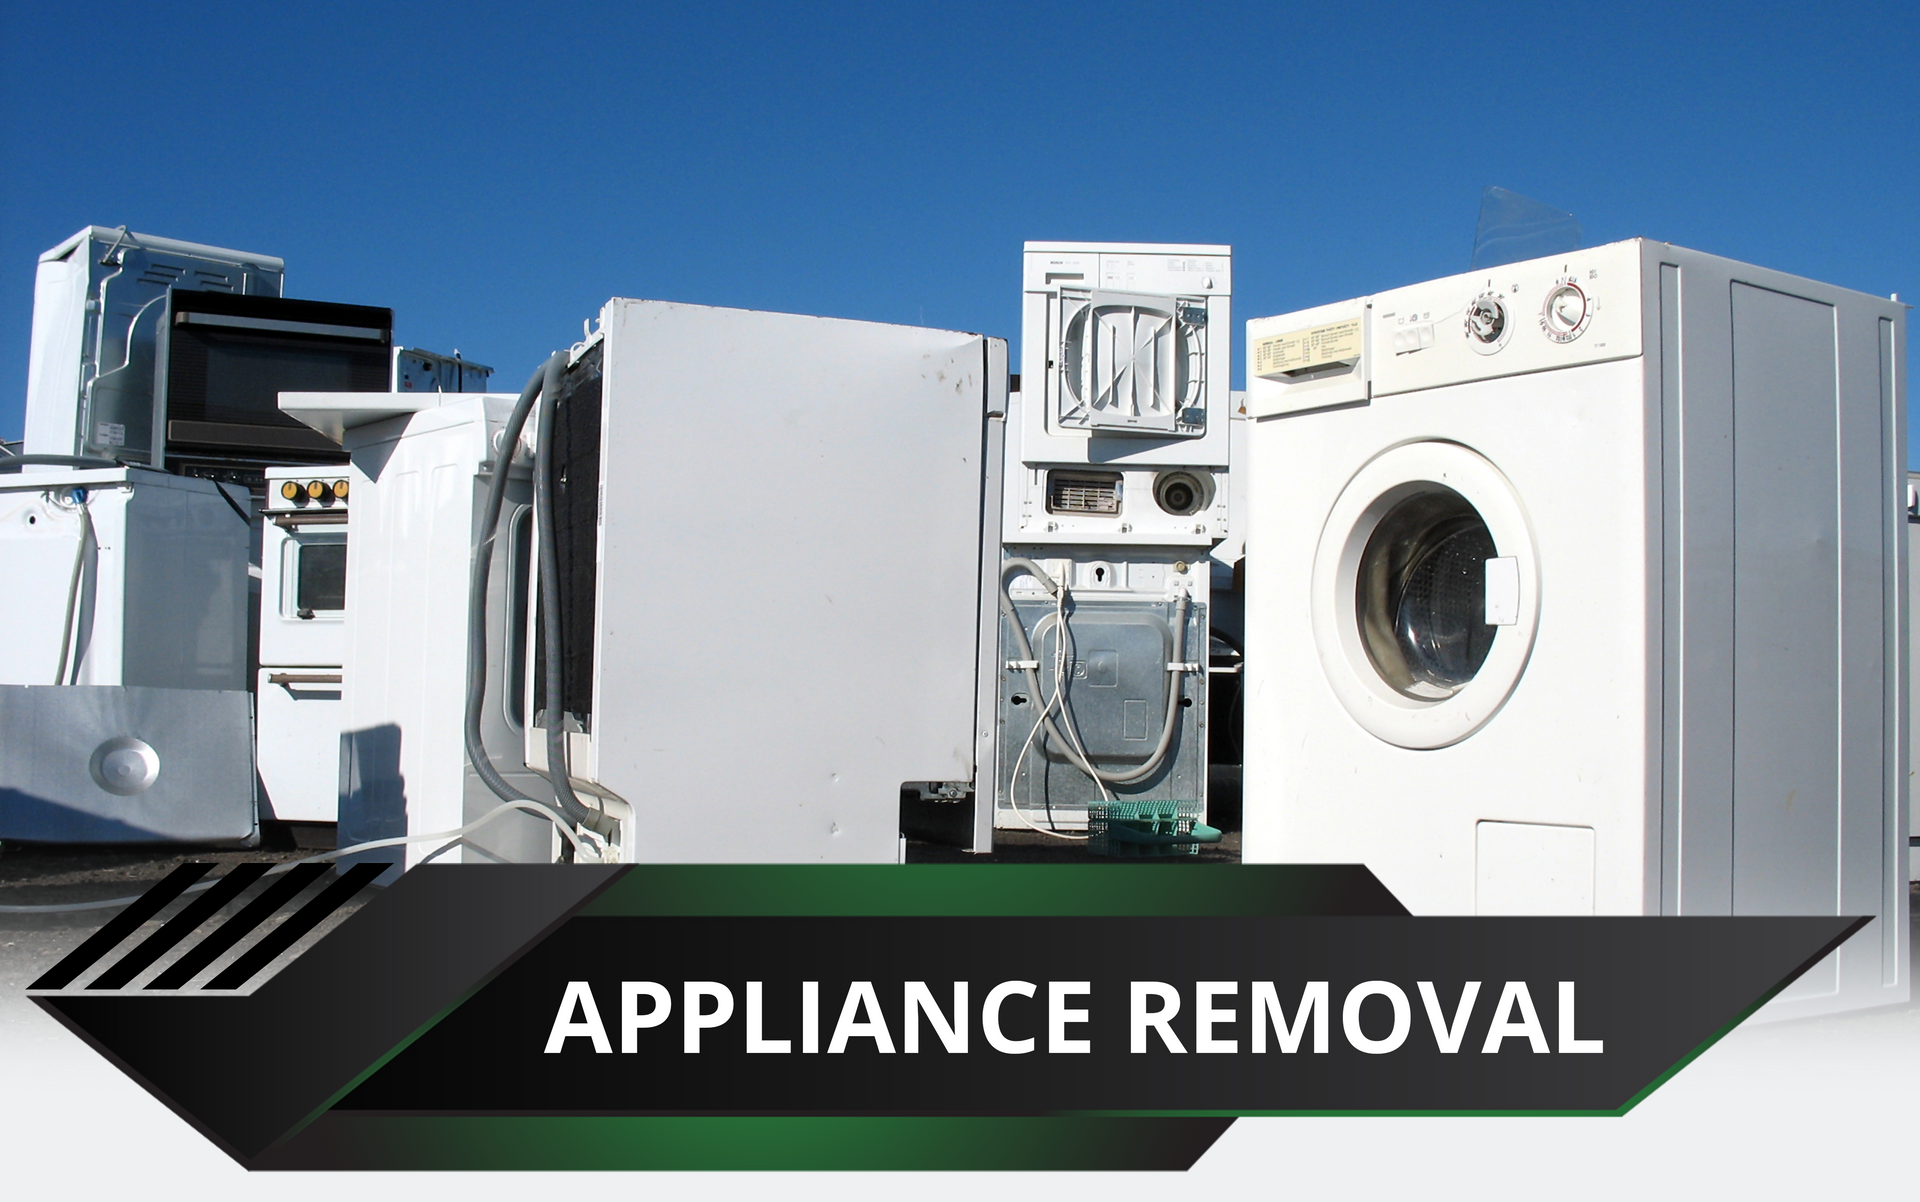 Appliance Removal in Madera, CA